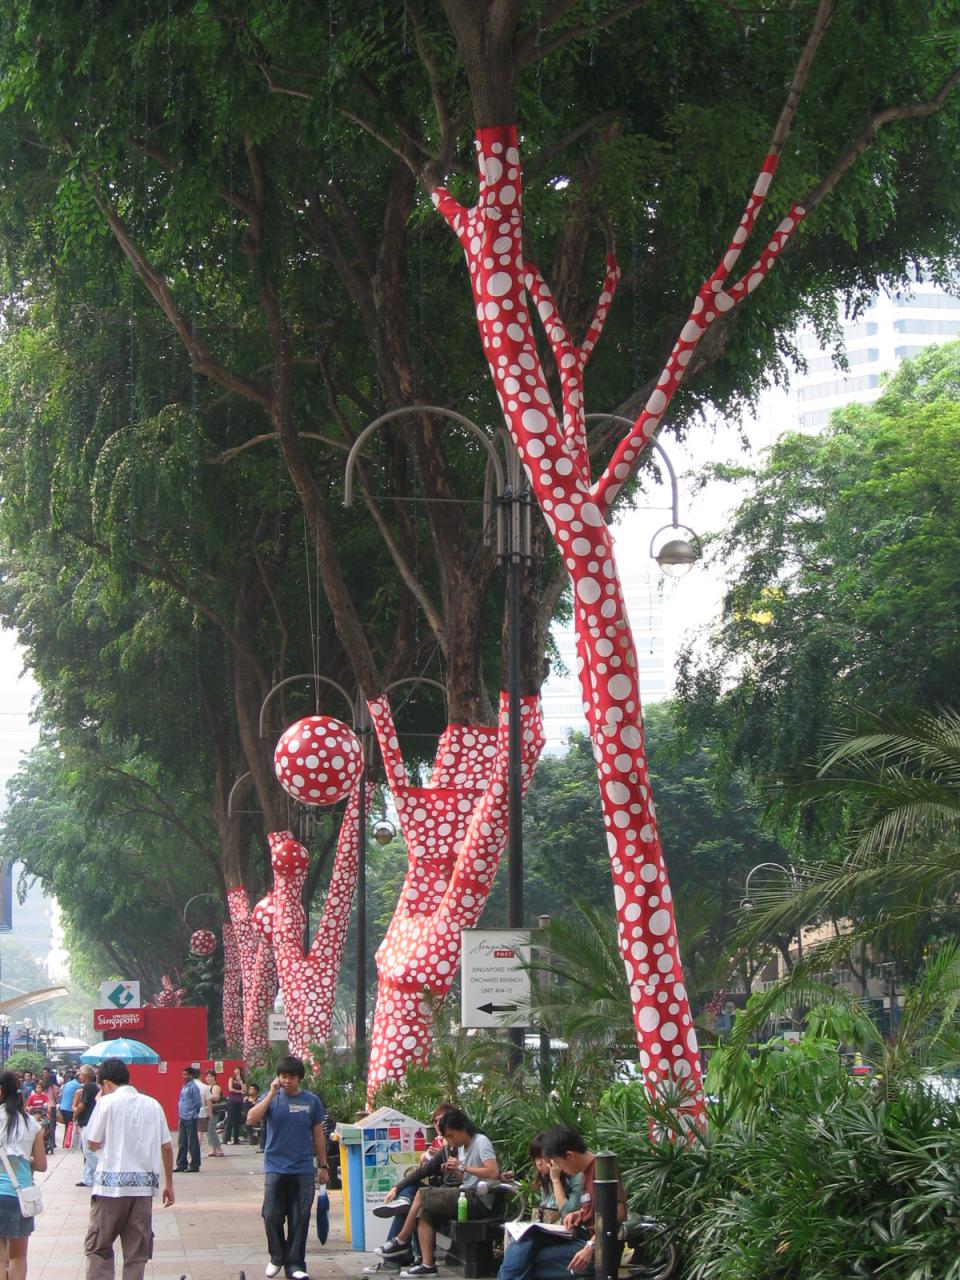  Yayoi Kusamas Beitrag zur Singapore Biennale 2006: "Ascension of Polka Dots on the Trees" in der Orchard Road 